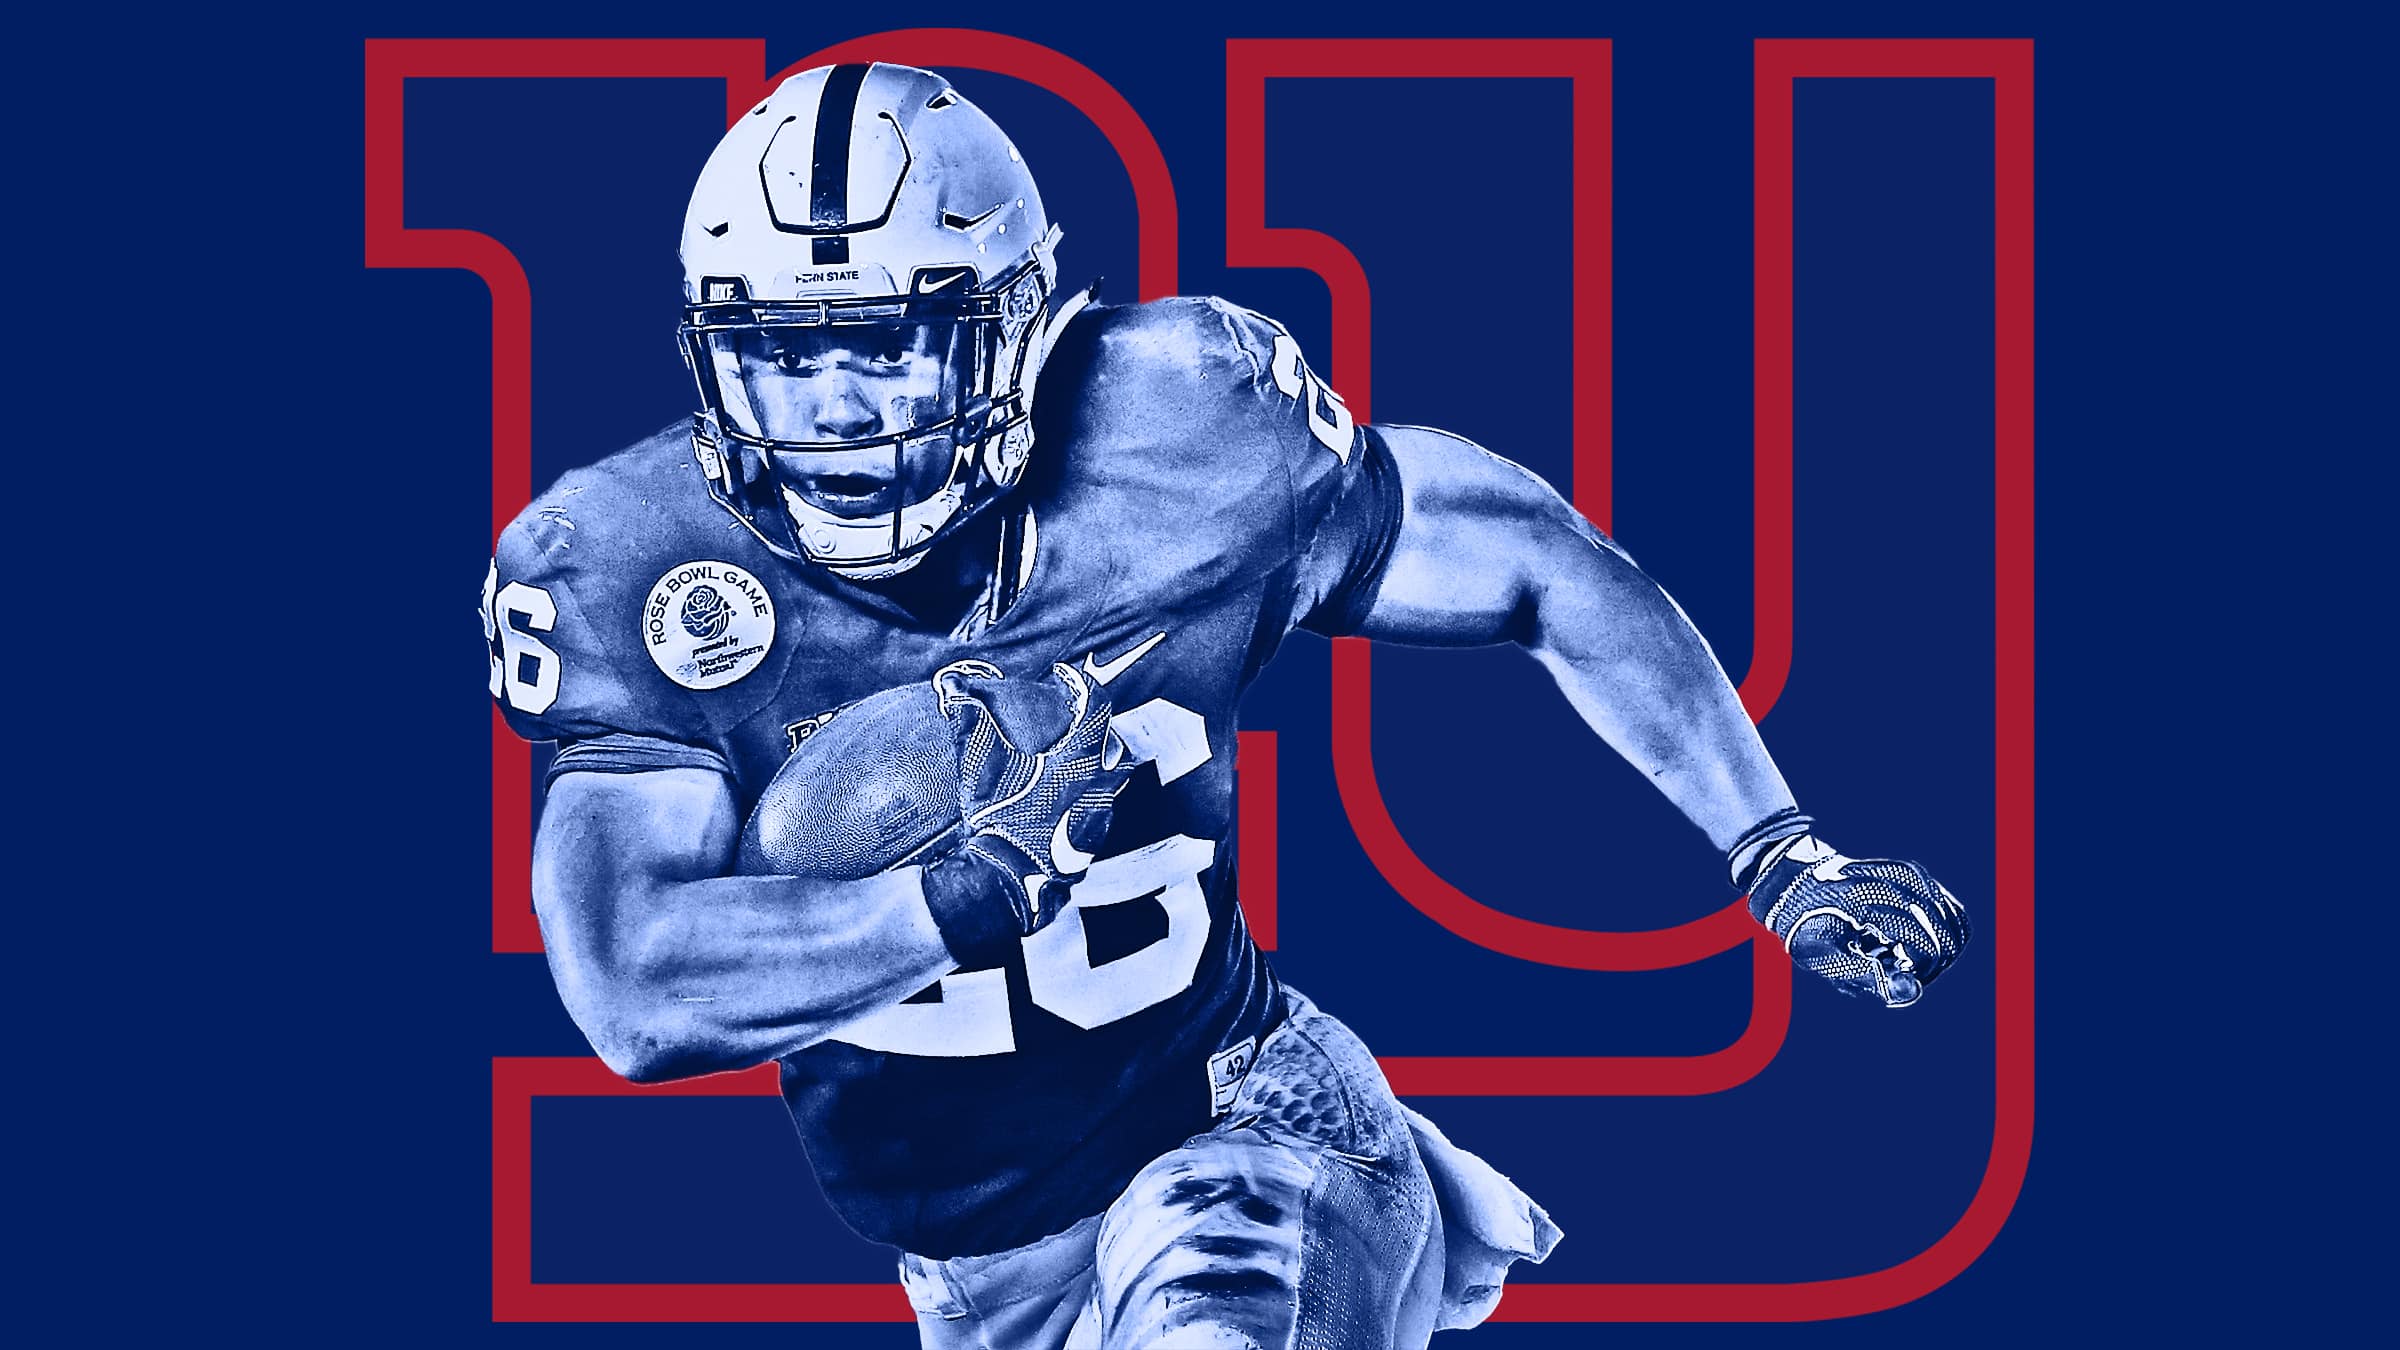 Free download New York Giants select Saquon Barkley with the 2nd